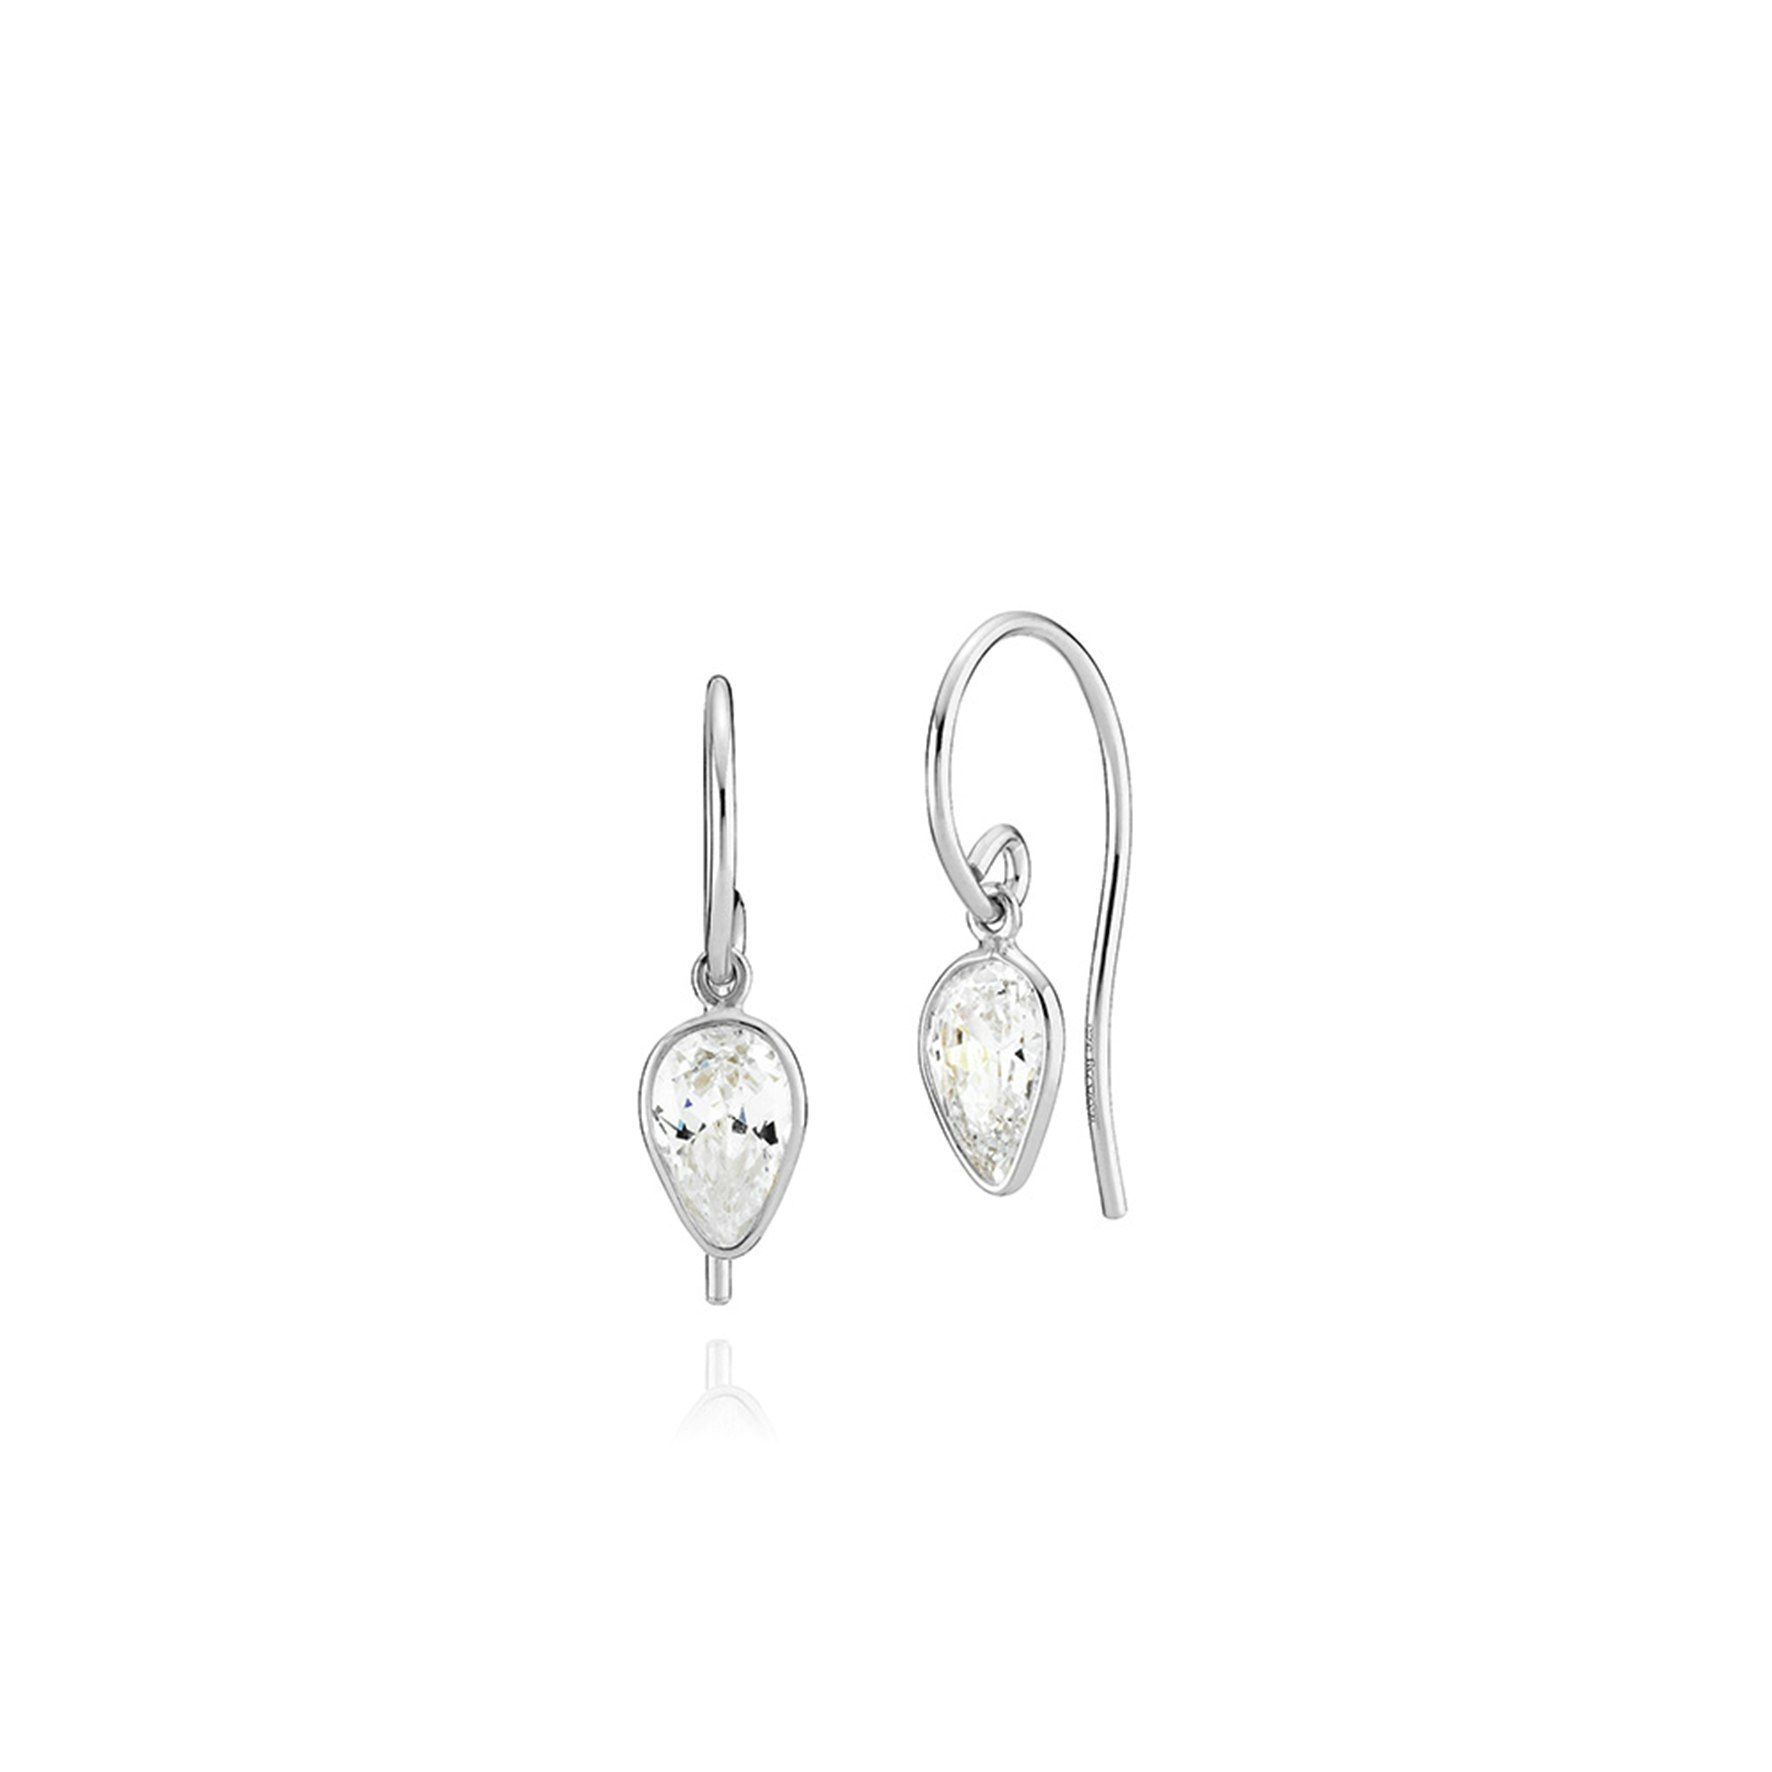 Aya Small Earrings from Izabel Camille in Silver Sterling 925